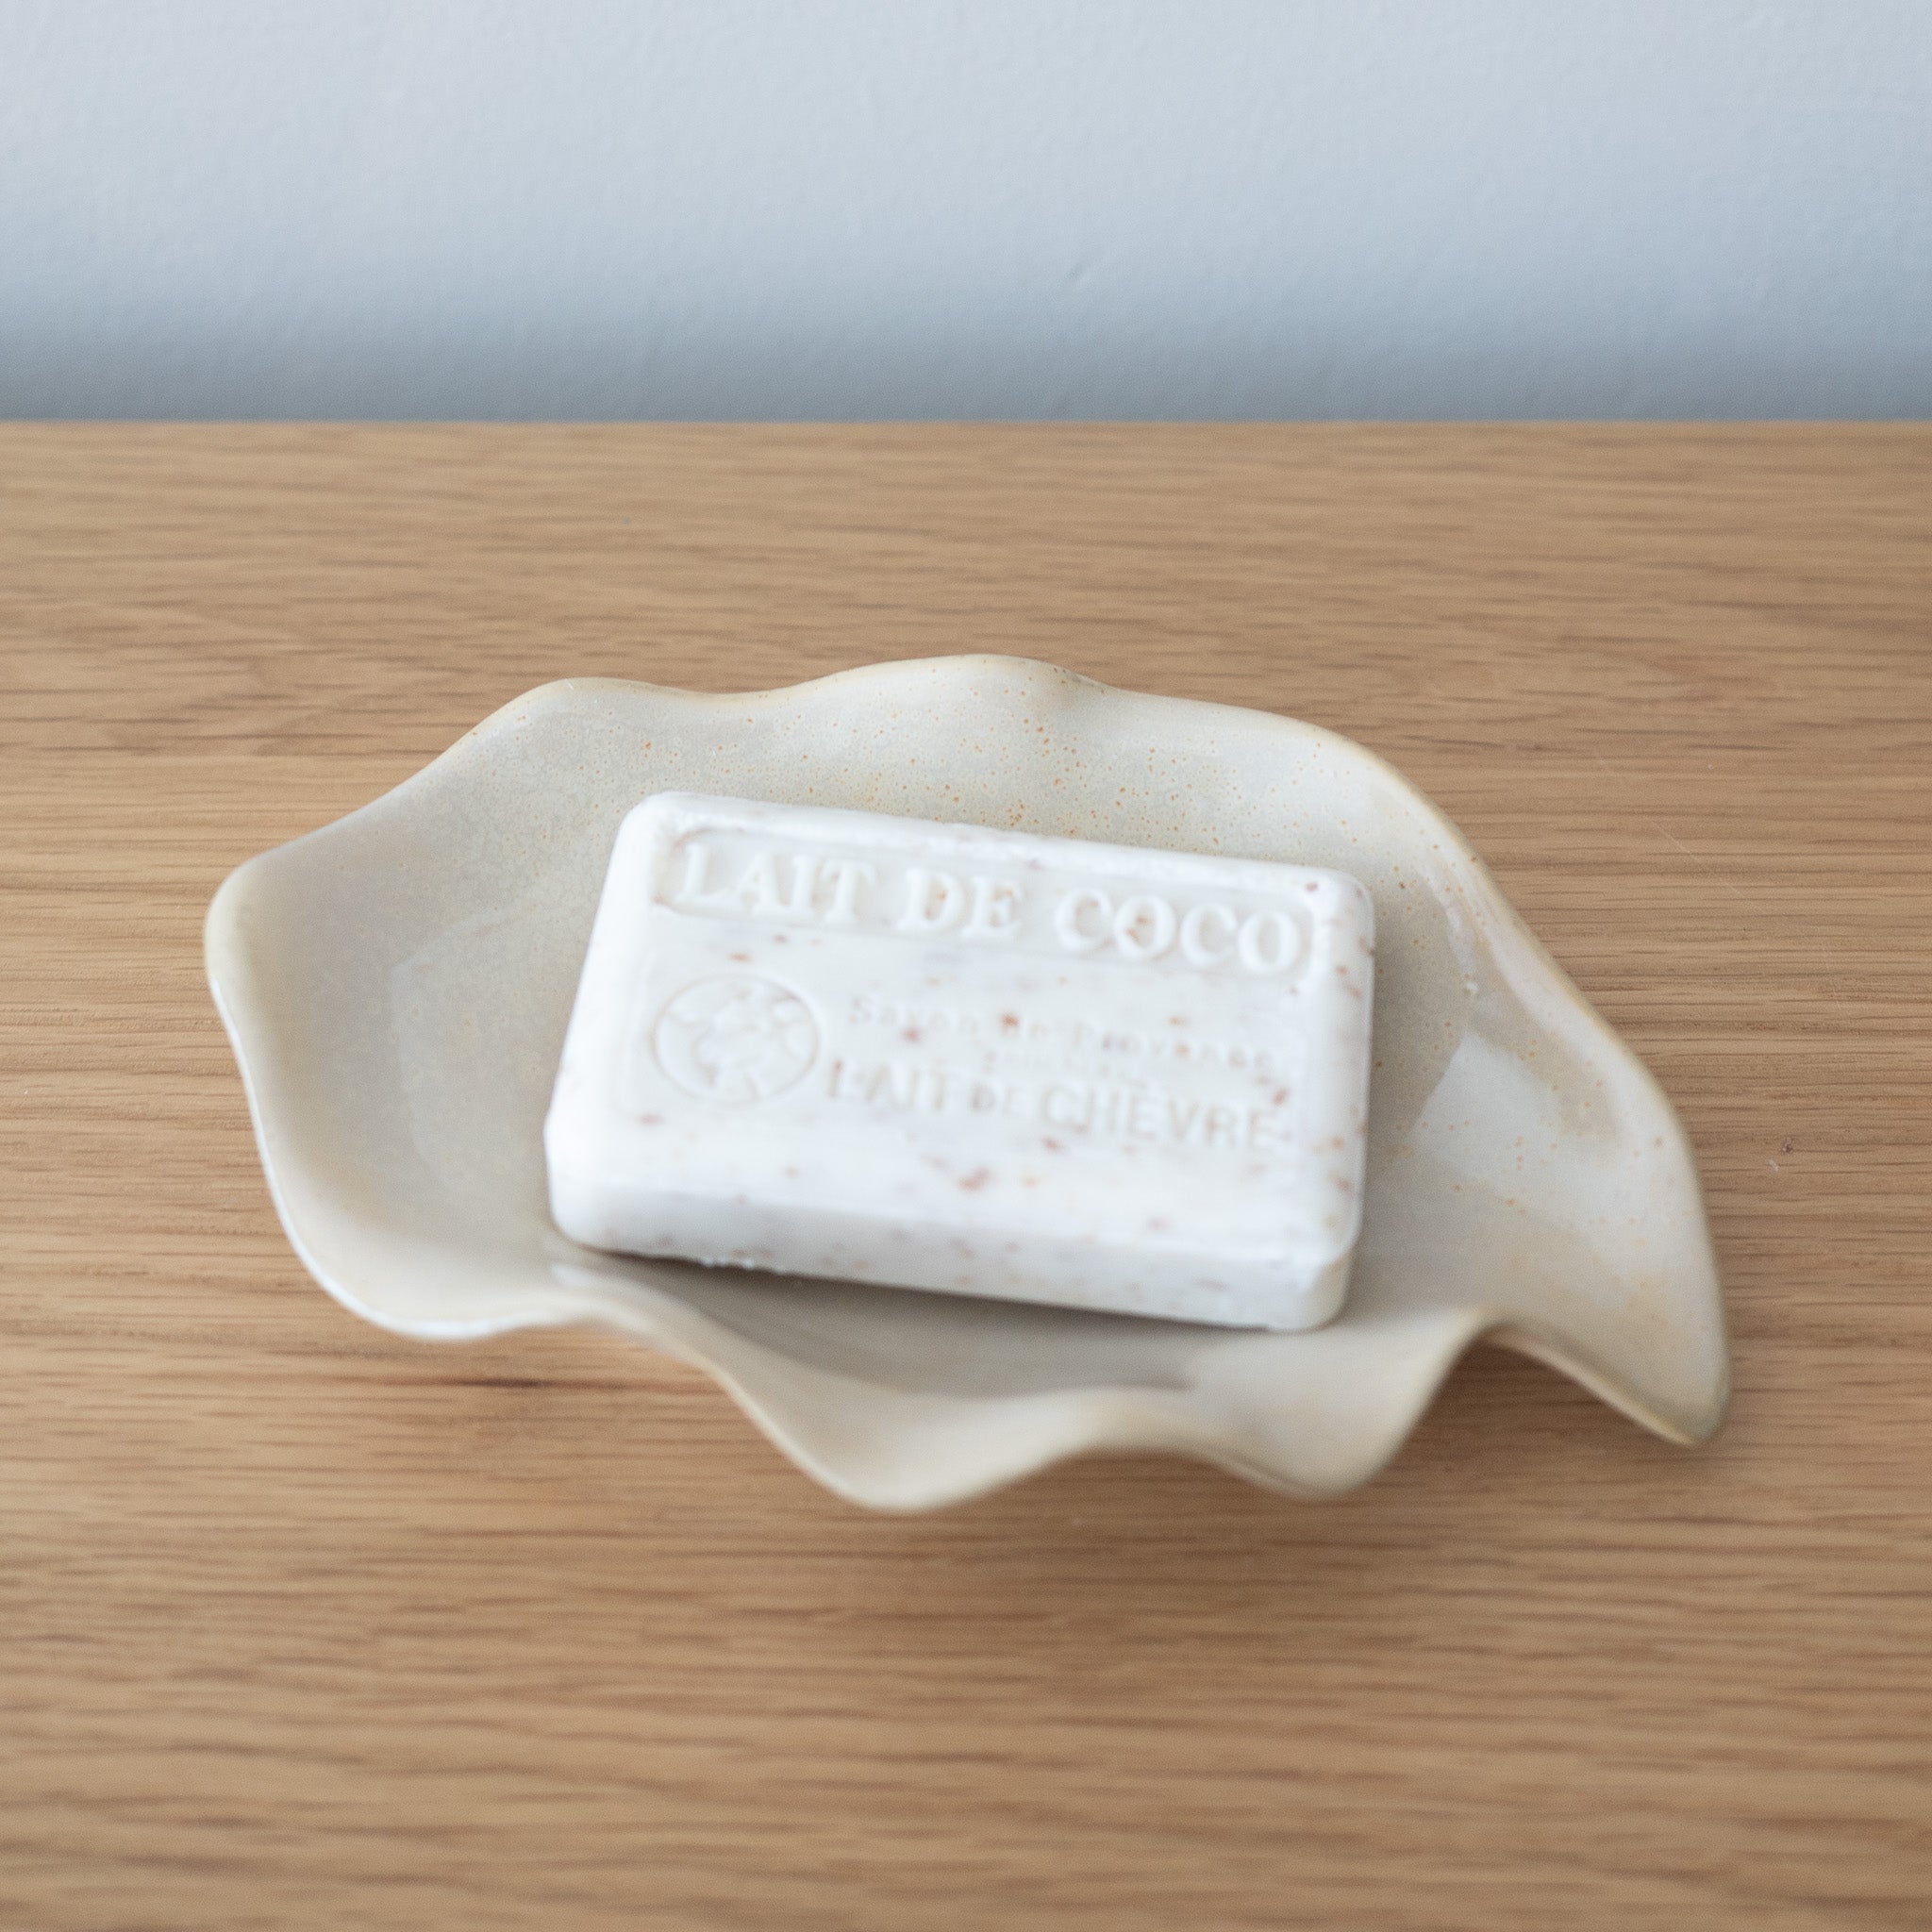 Oyster Soap Dish